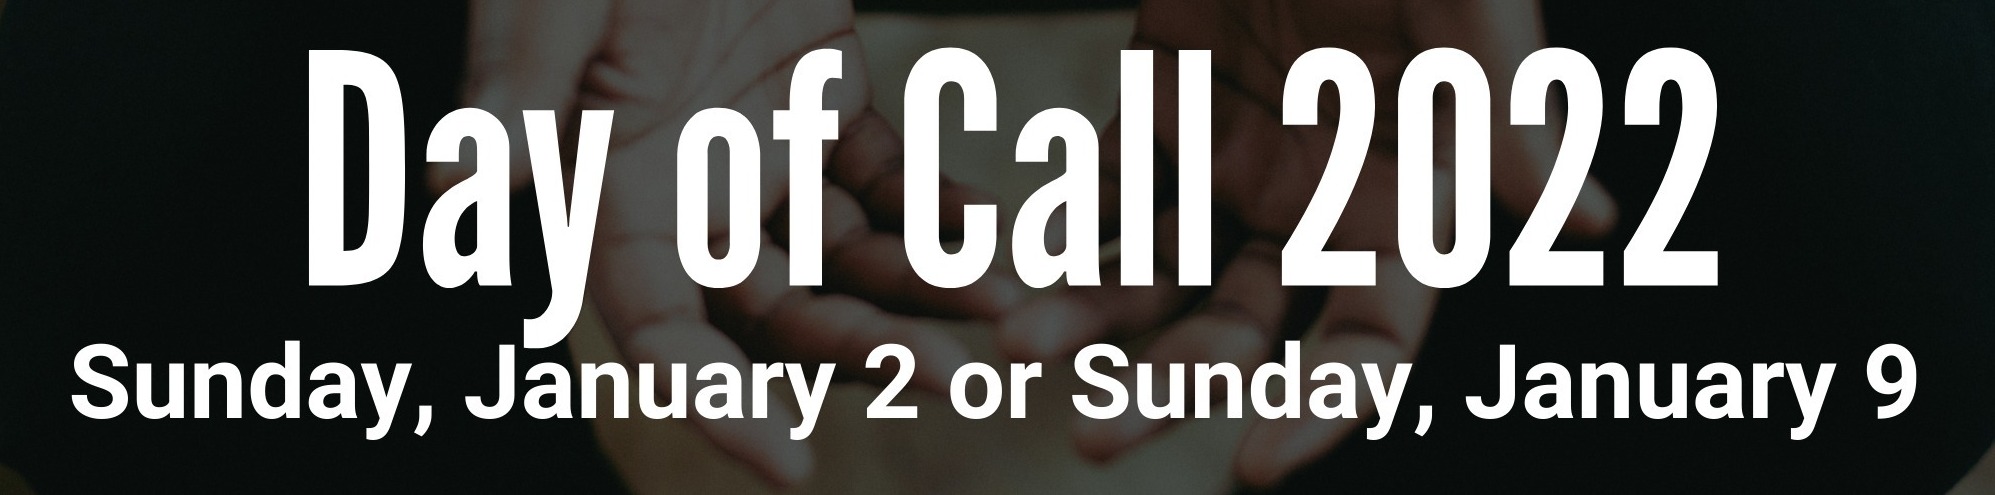 Day Of Call 2022 Banner